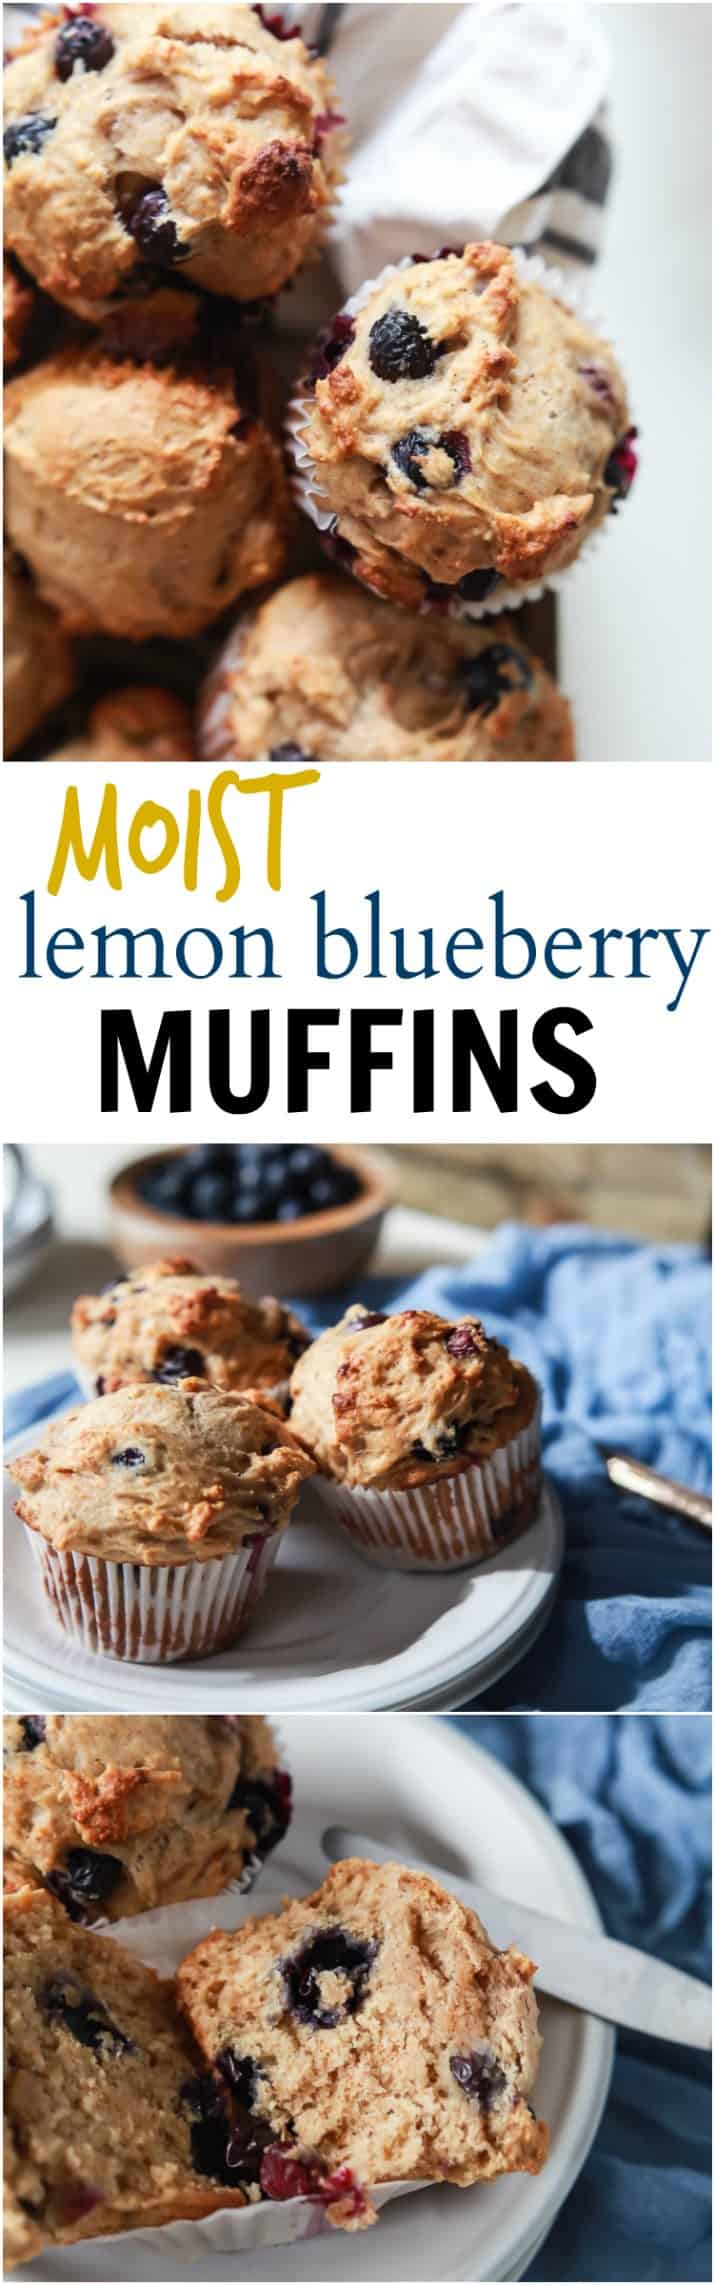 These extremely Moist Lemon Blueberry Muffins are so easy to make, filled with fresh lemon and blueberry flavor, and made with no butter or refined sugar! The BEST muffin ever! | joyfulhealthyeats.com